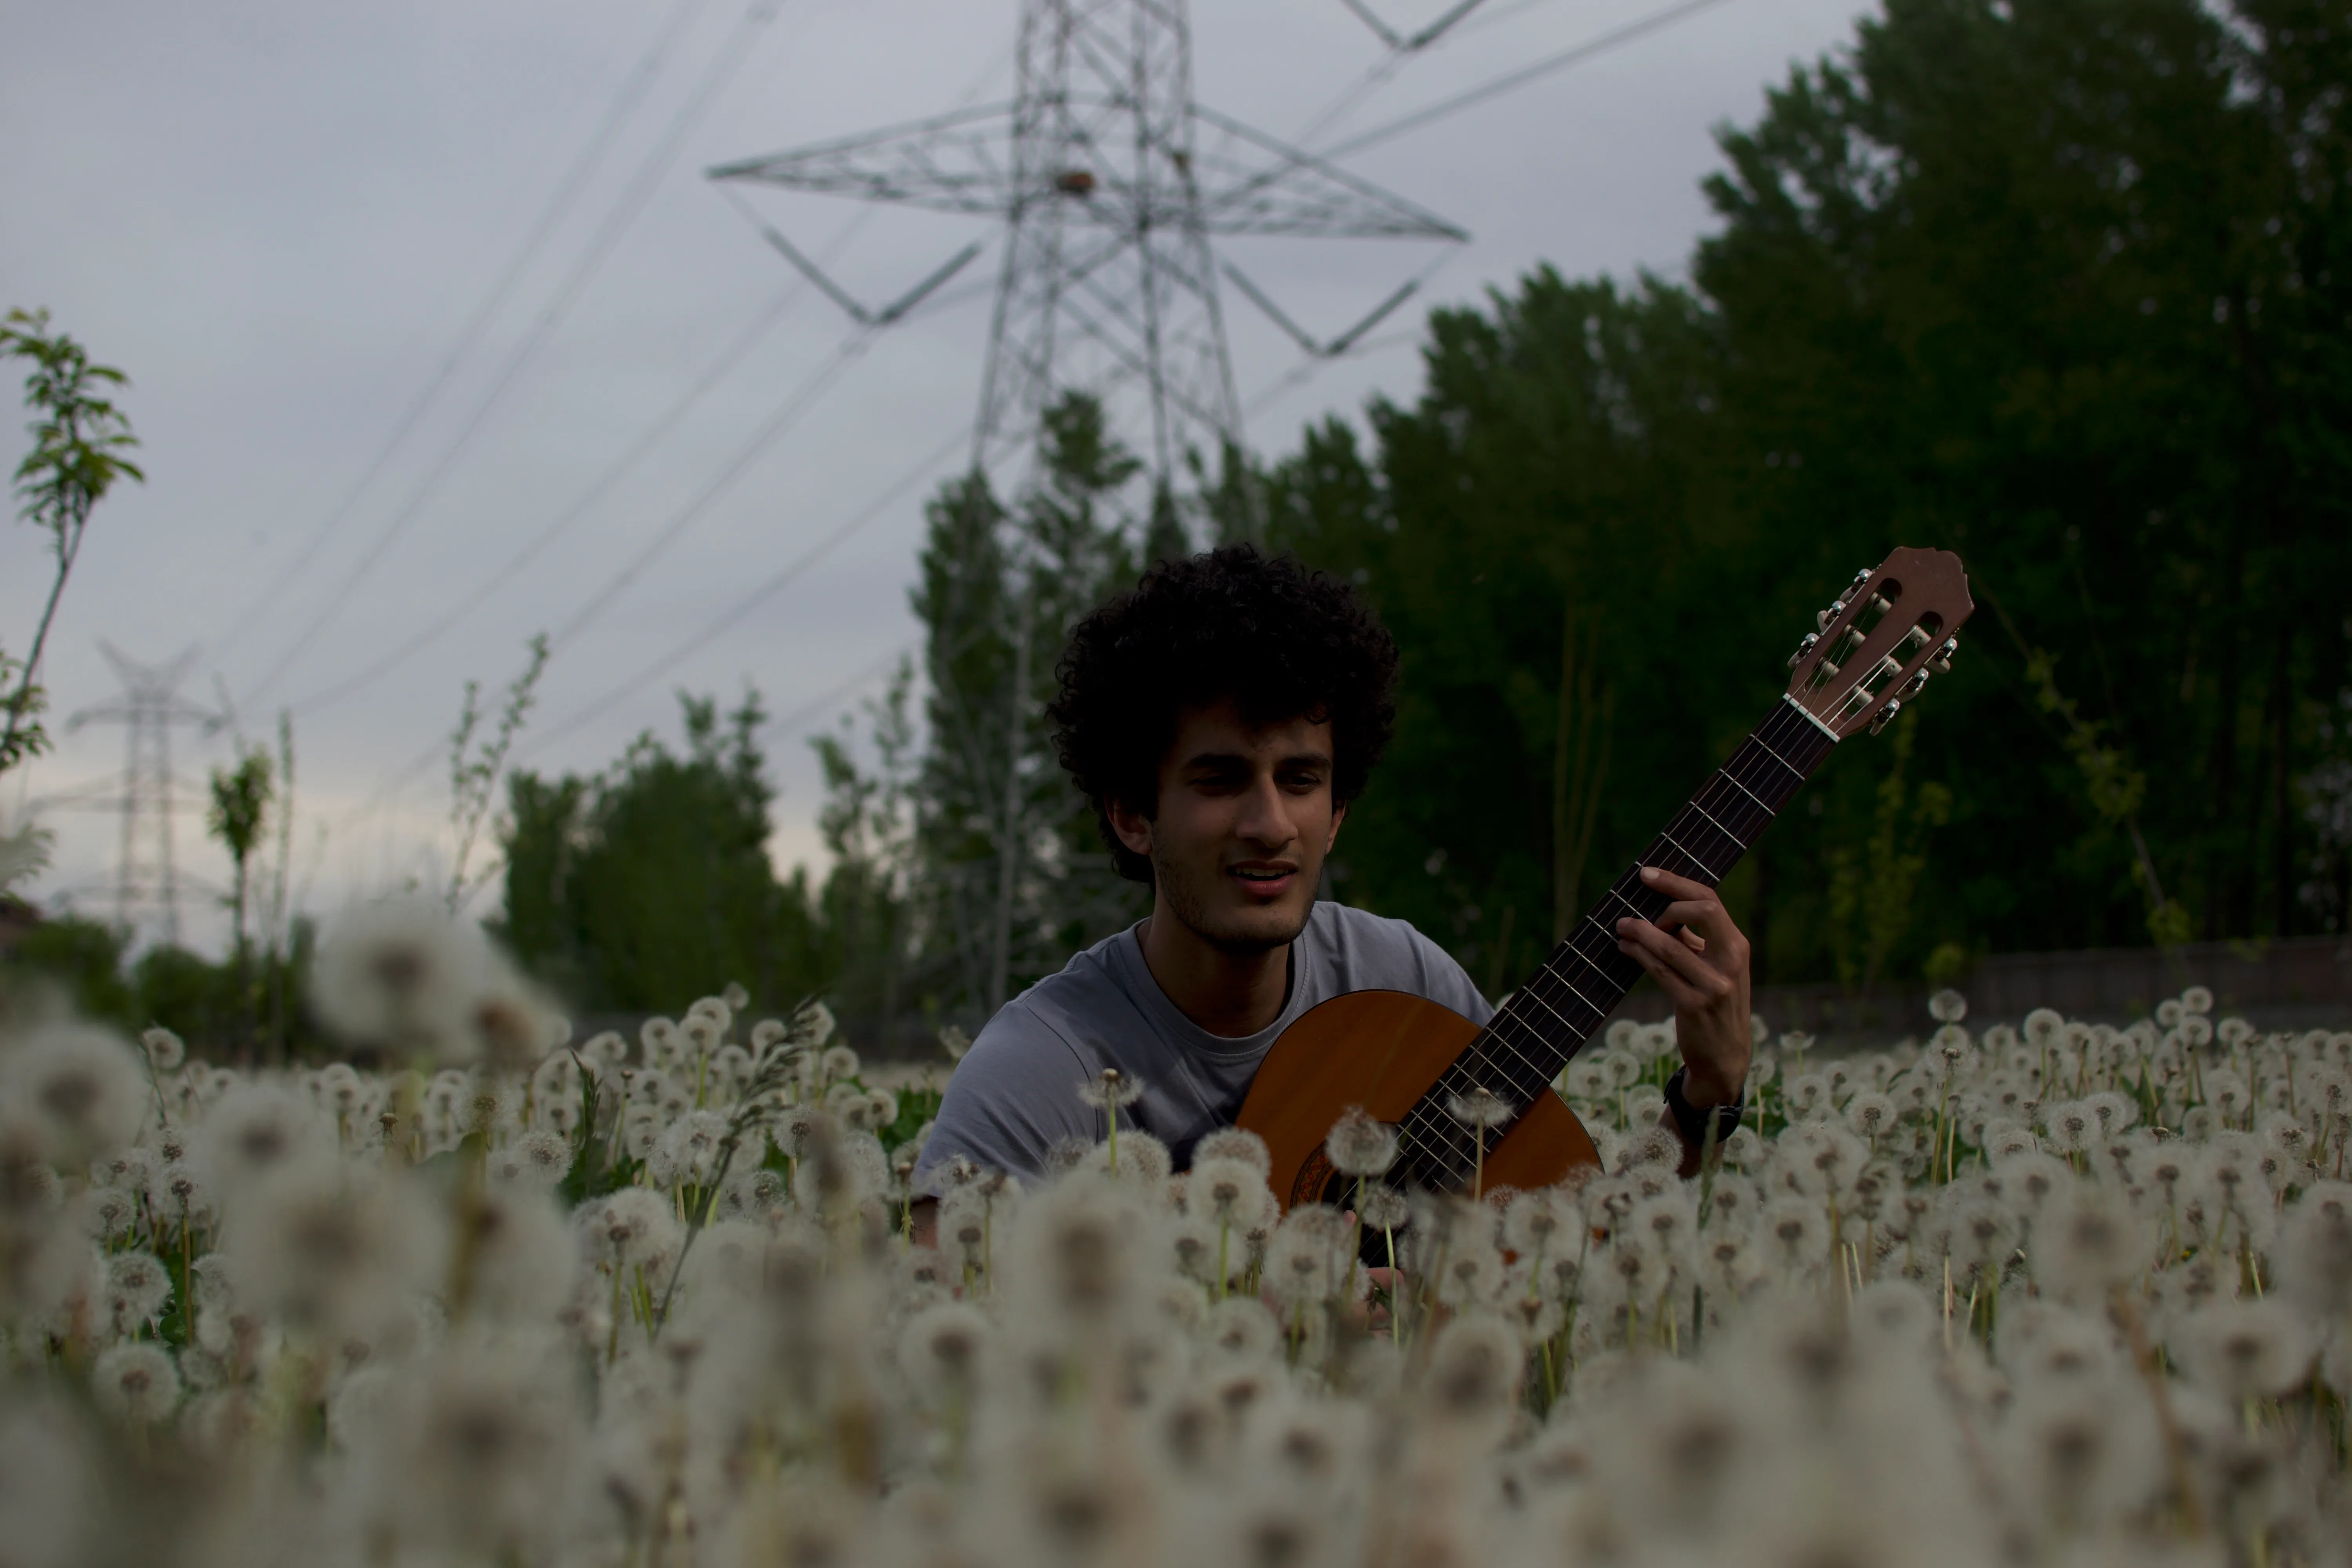 A man holding a classical guitar in a field covered with dandelions.